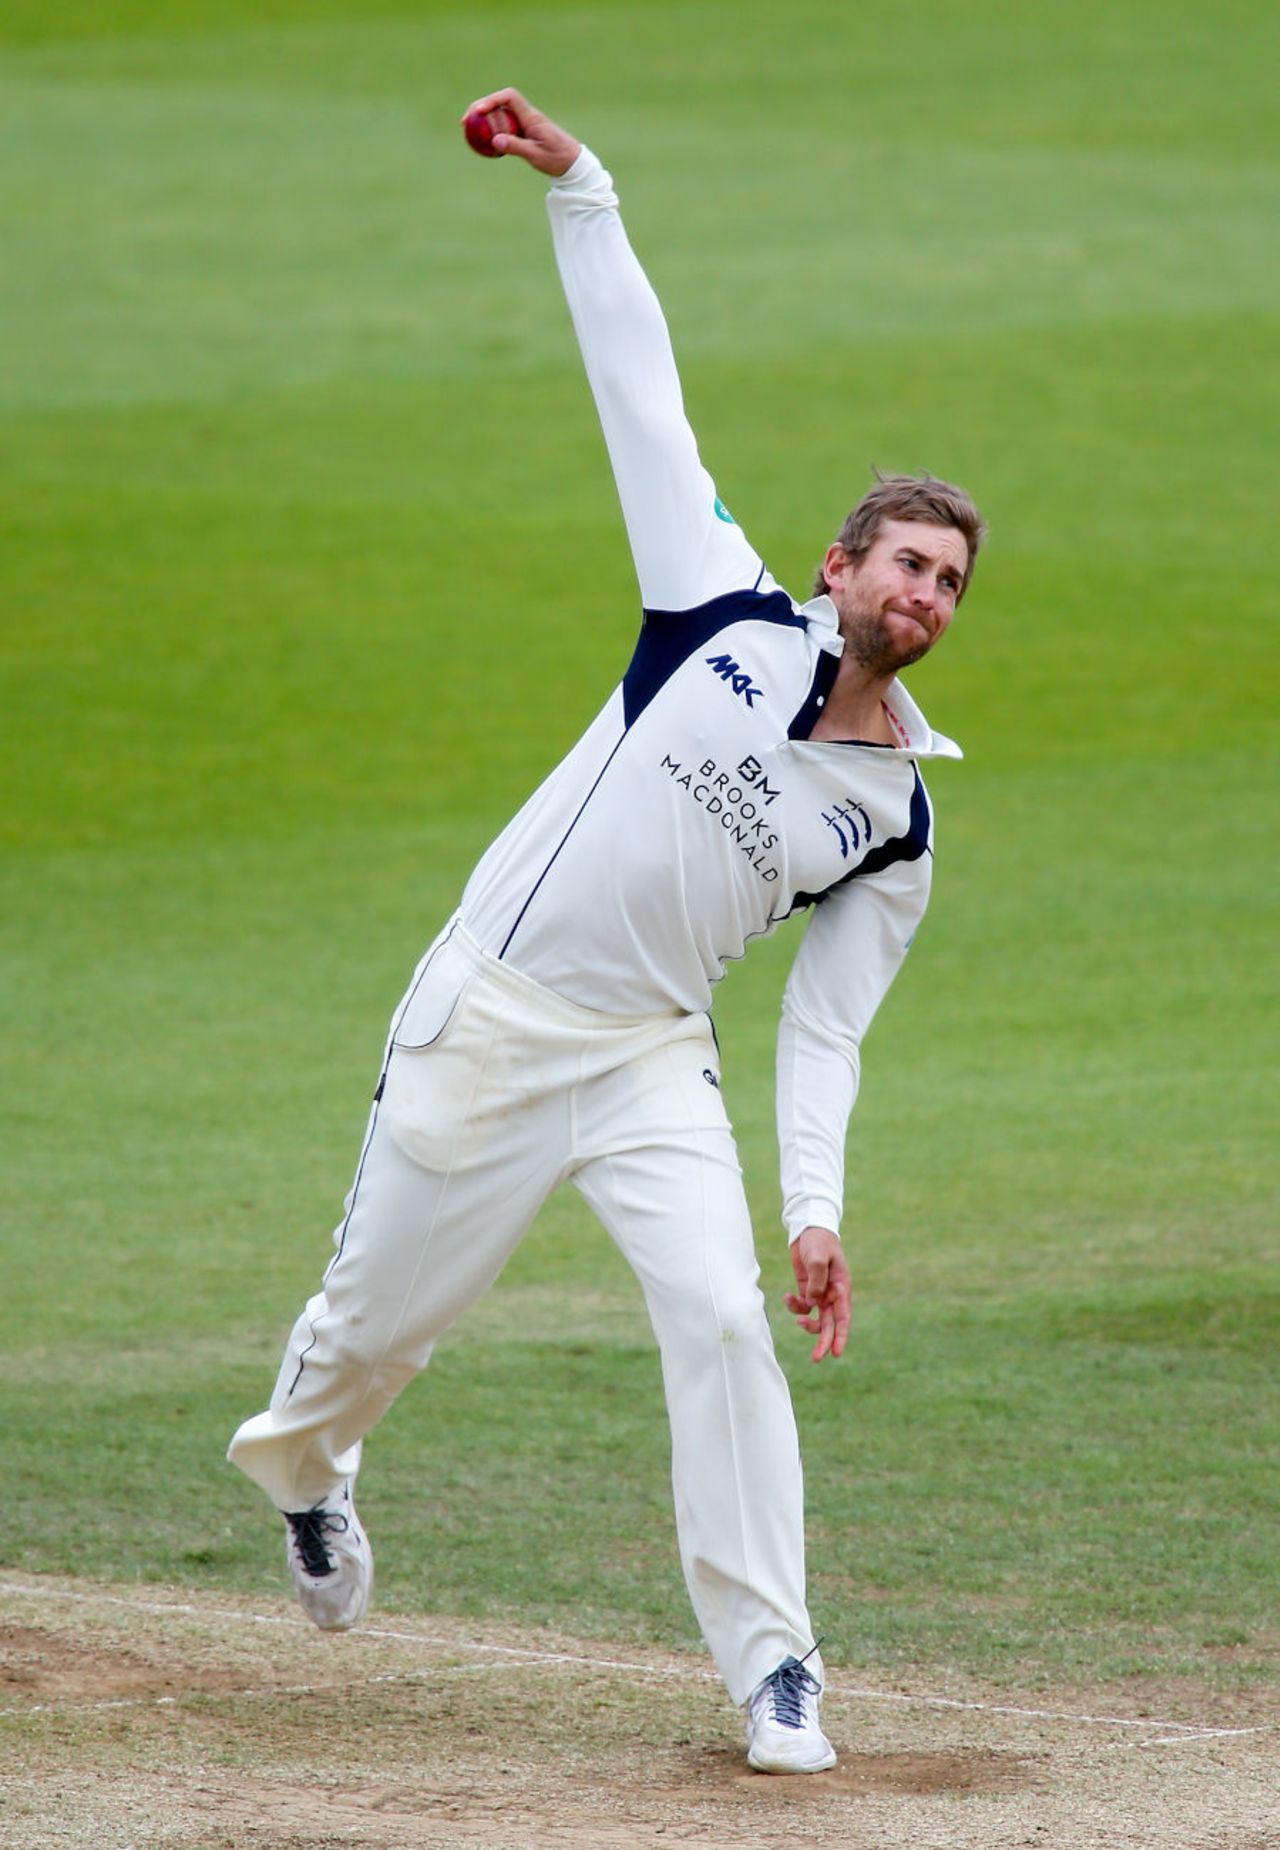 Dawid Malan bowls for Middlesex, Surrey v Middlesex, Specsavers Championship Division One, Kia Oval, May 17, 2016